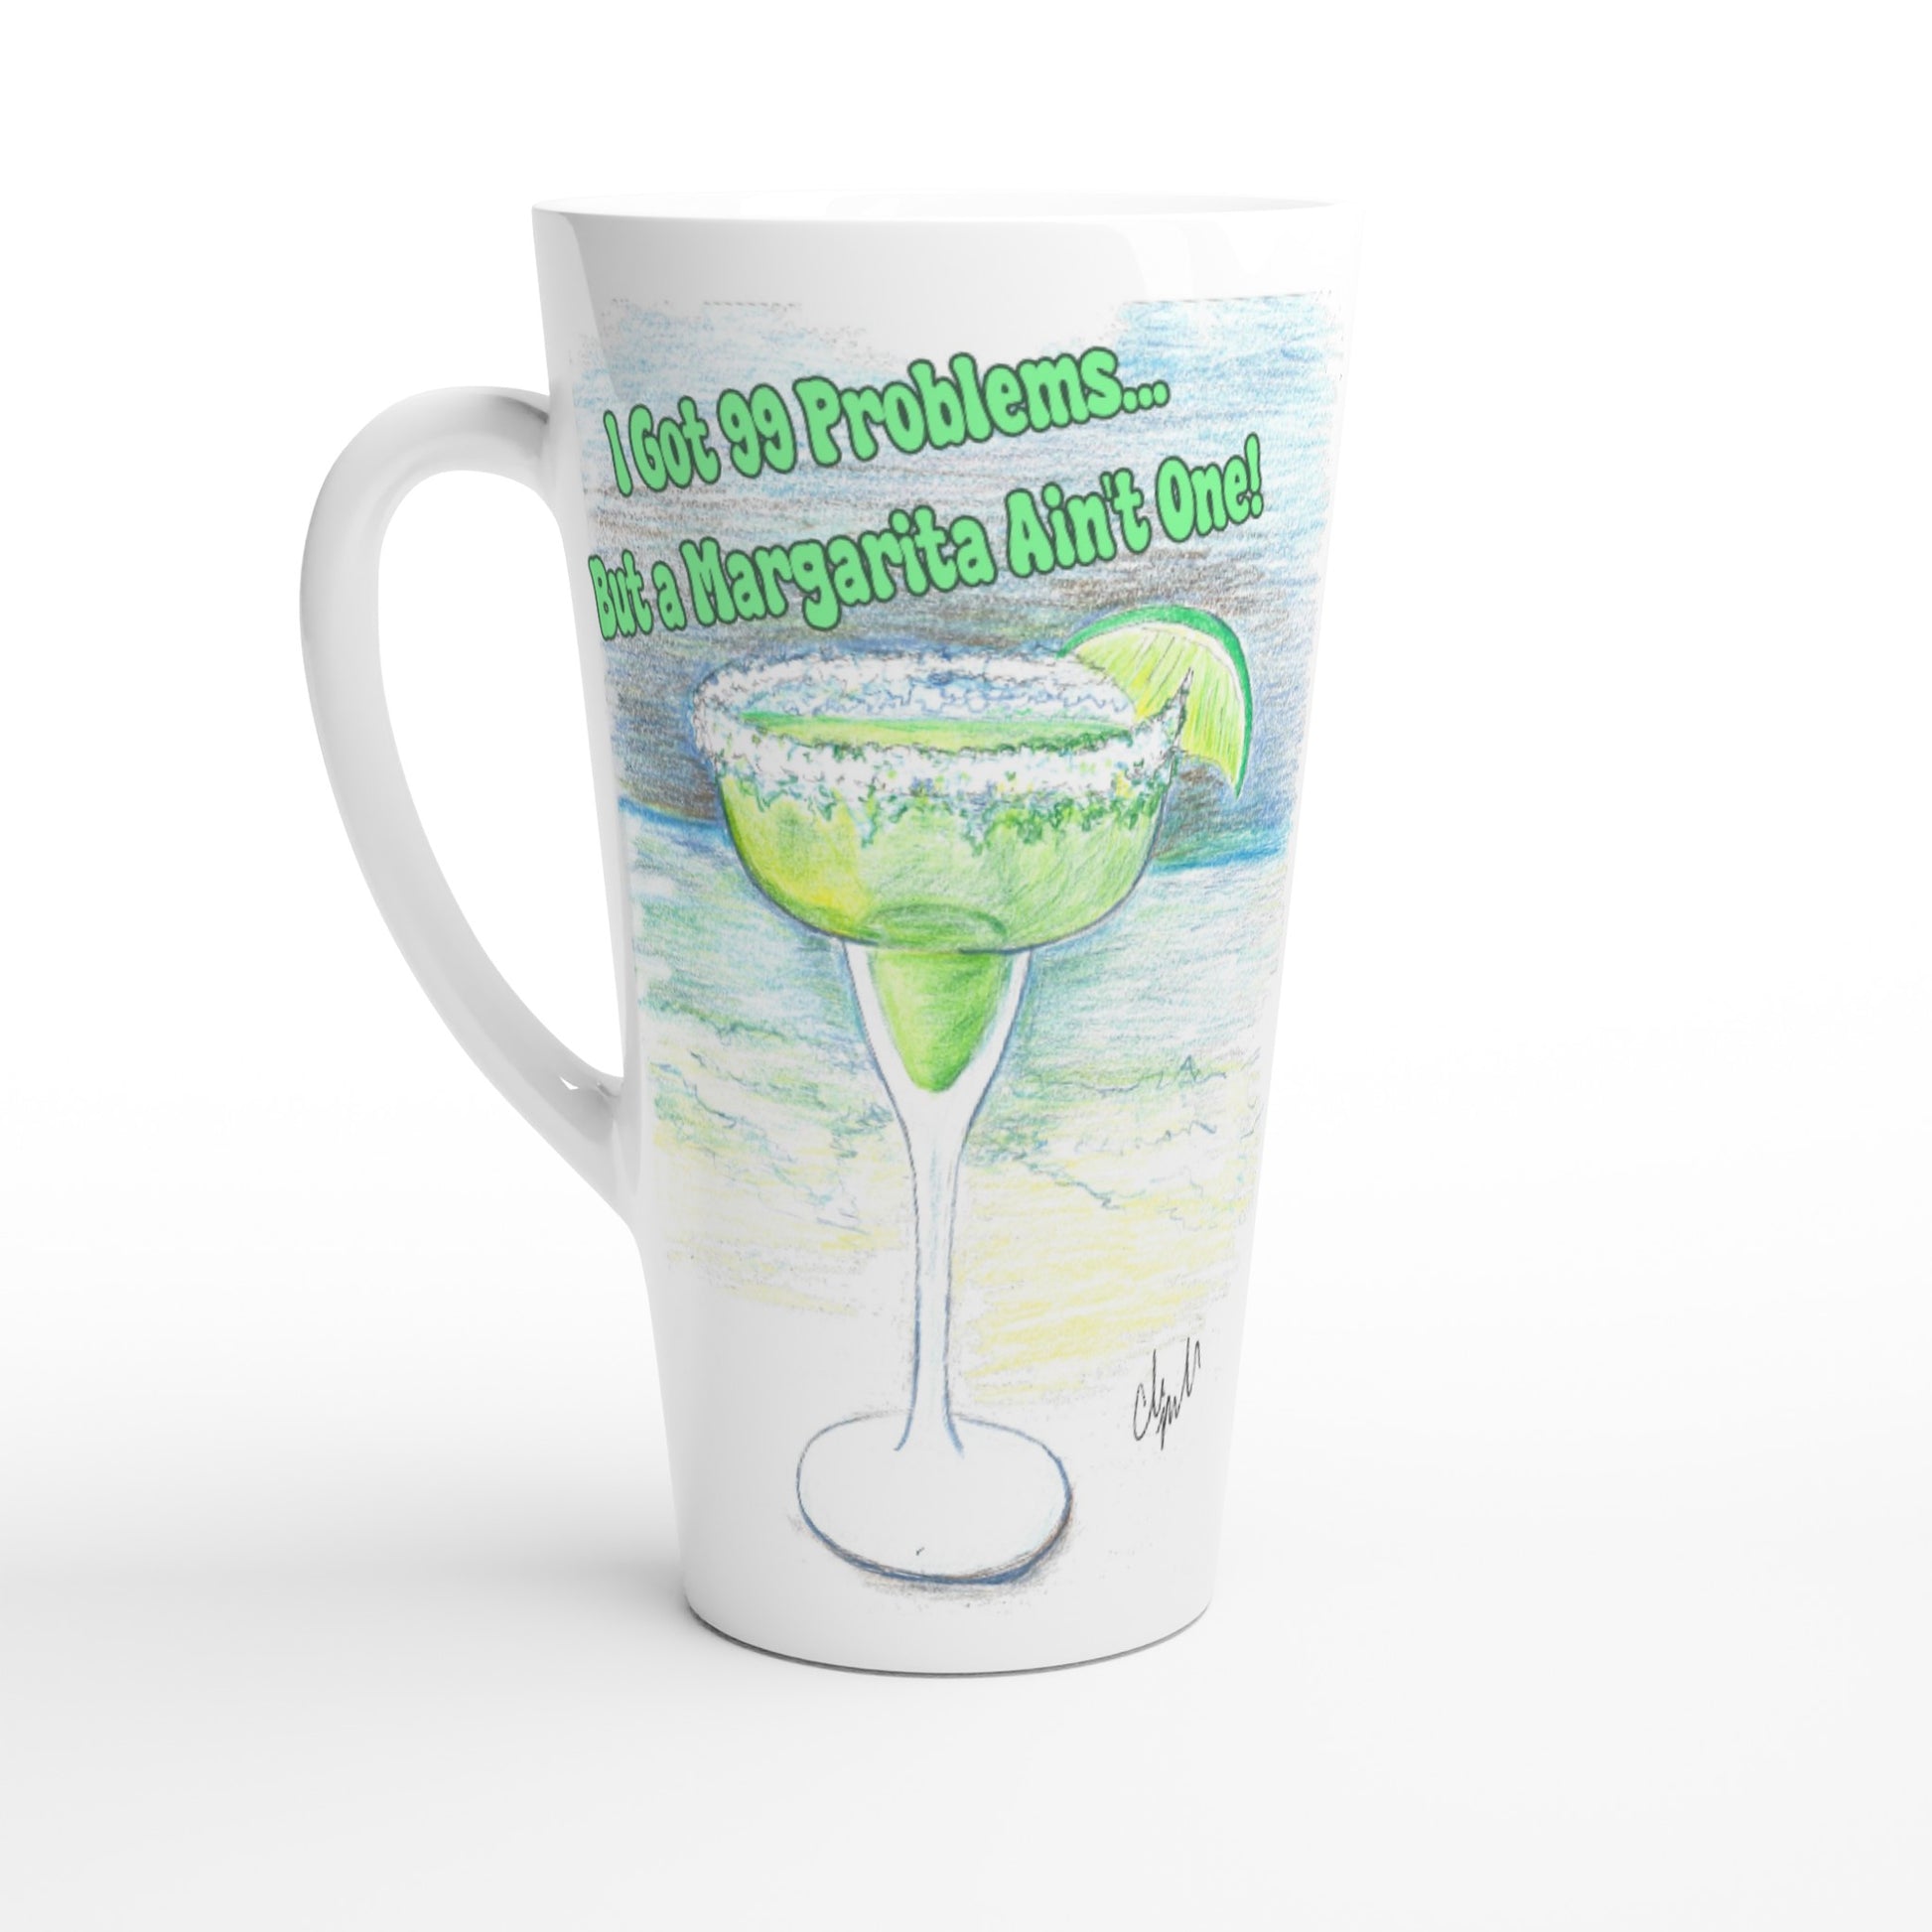 A Seventeener white ceramic 17oz mug with motto I Got 99 Problems But a Margarita Aint One front and WhatYa Say logo on back dishwasher and microwave safe from WhatYa Say Apparel front side view.